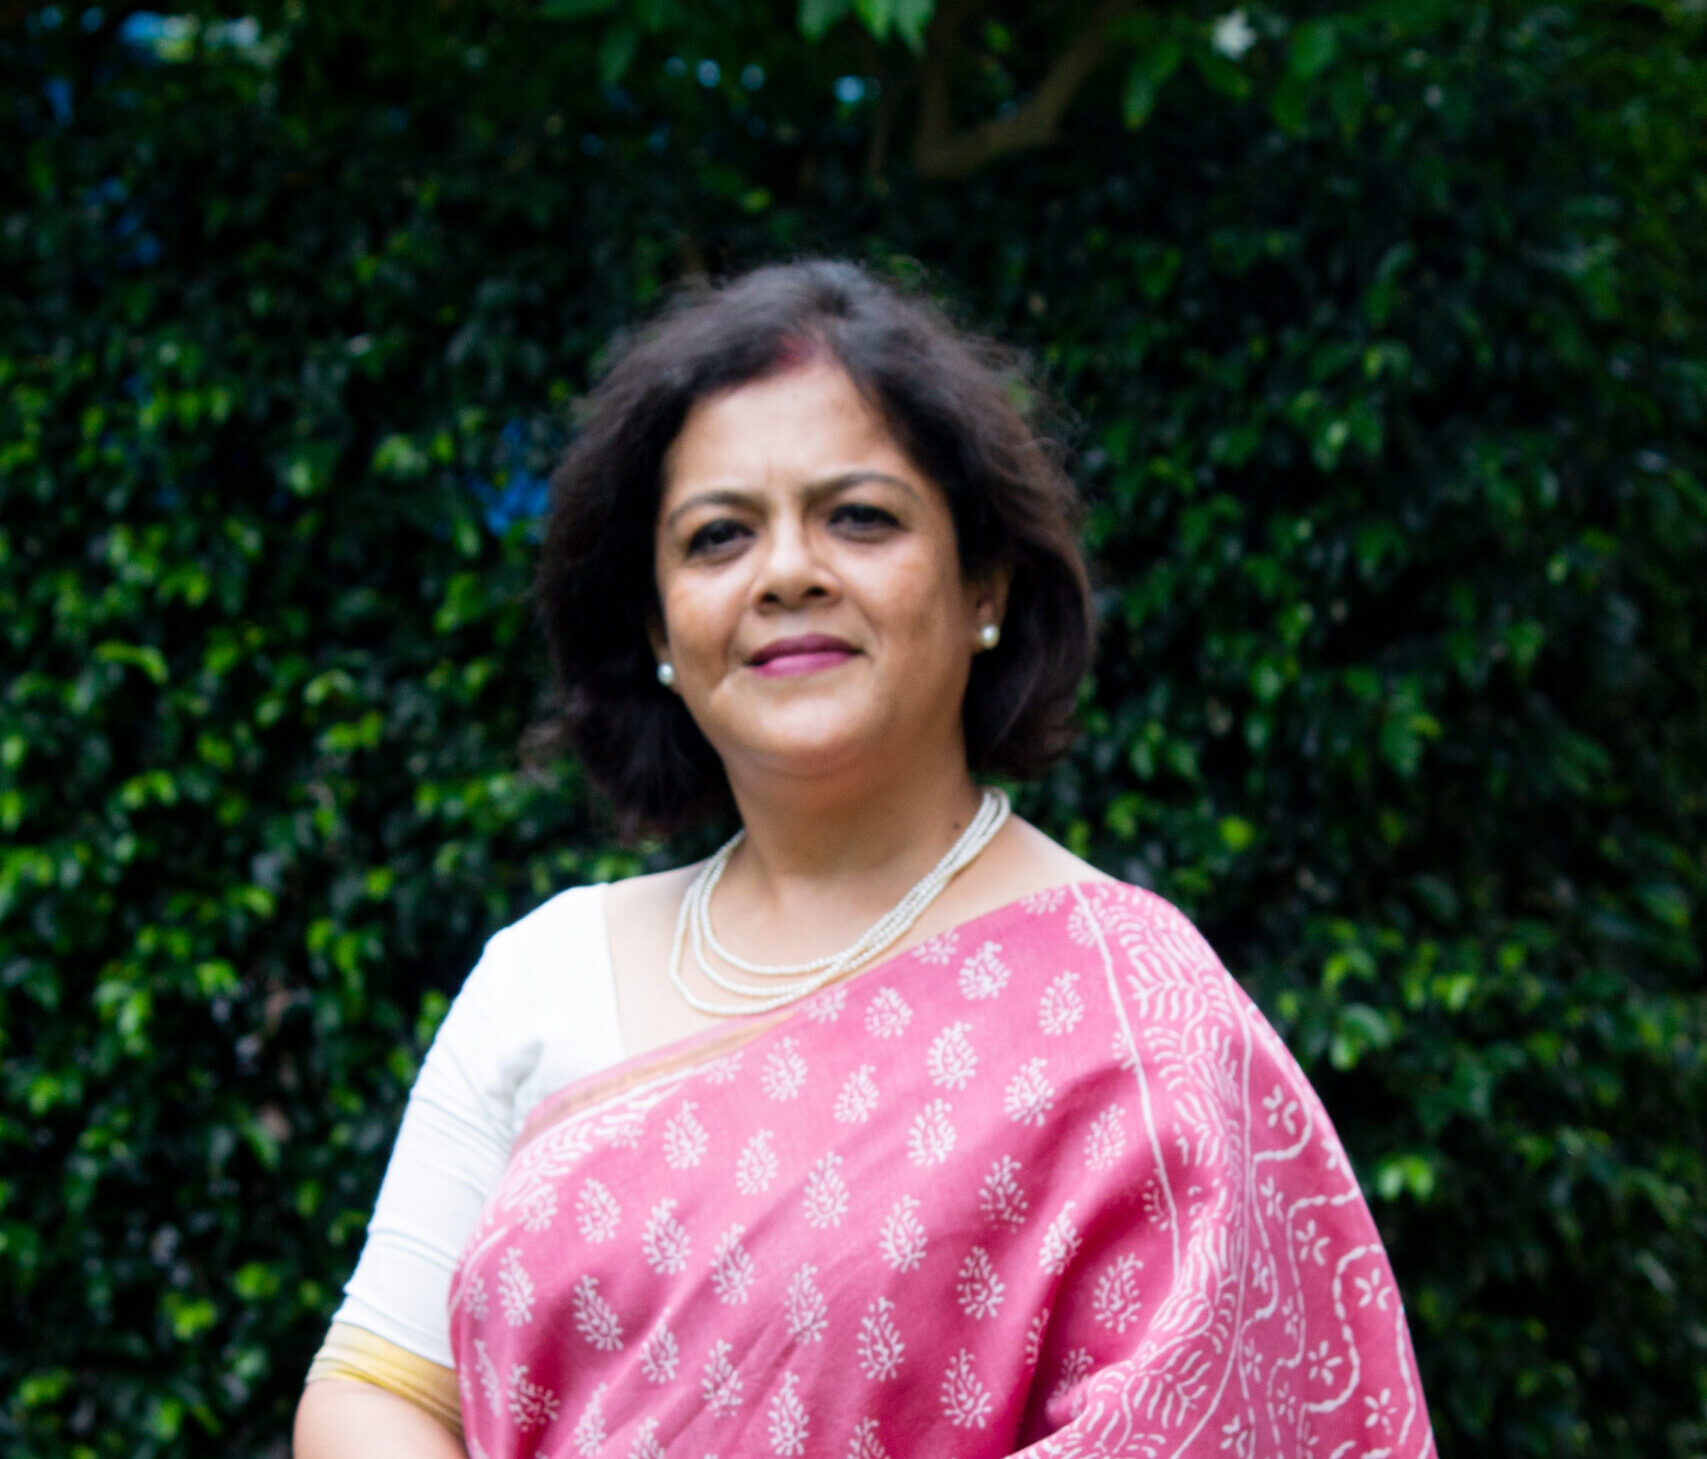 Fortune Hotels appoints Sumita C Majumdar as Head of Human Resources and Learning & Development